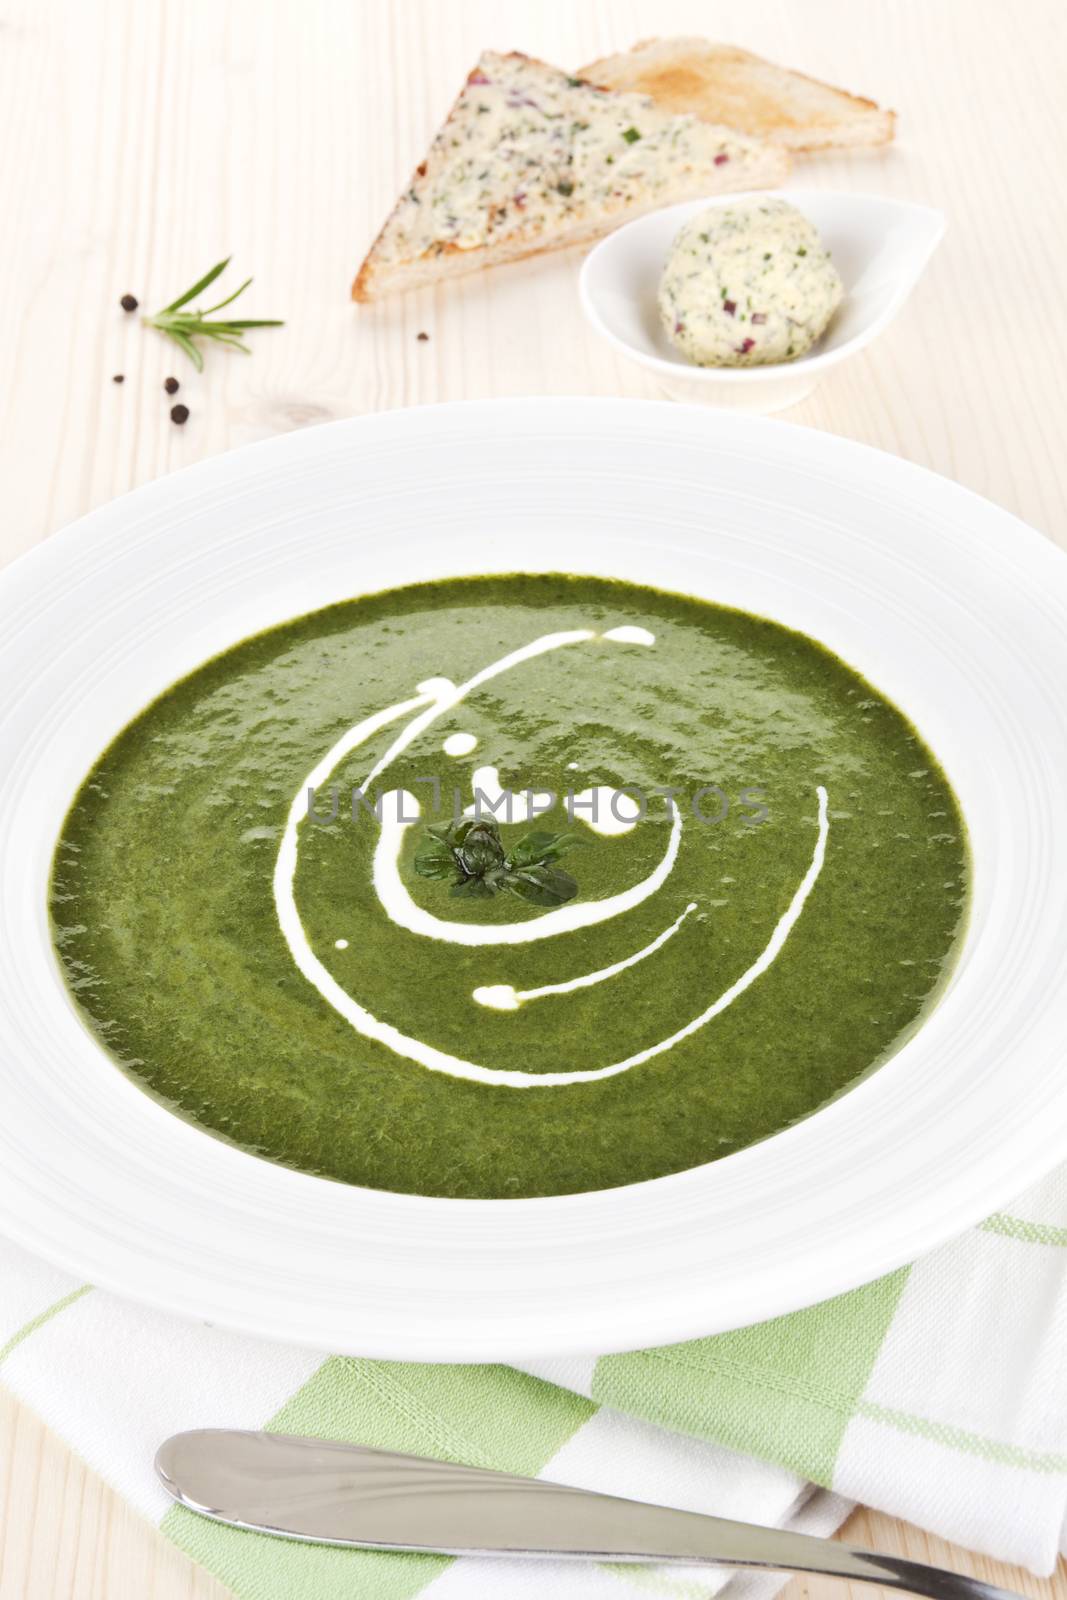 Spinach soup. by eskymaks